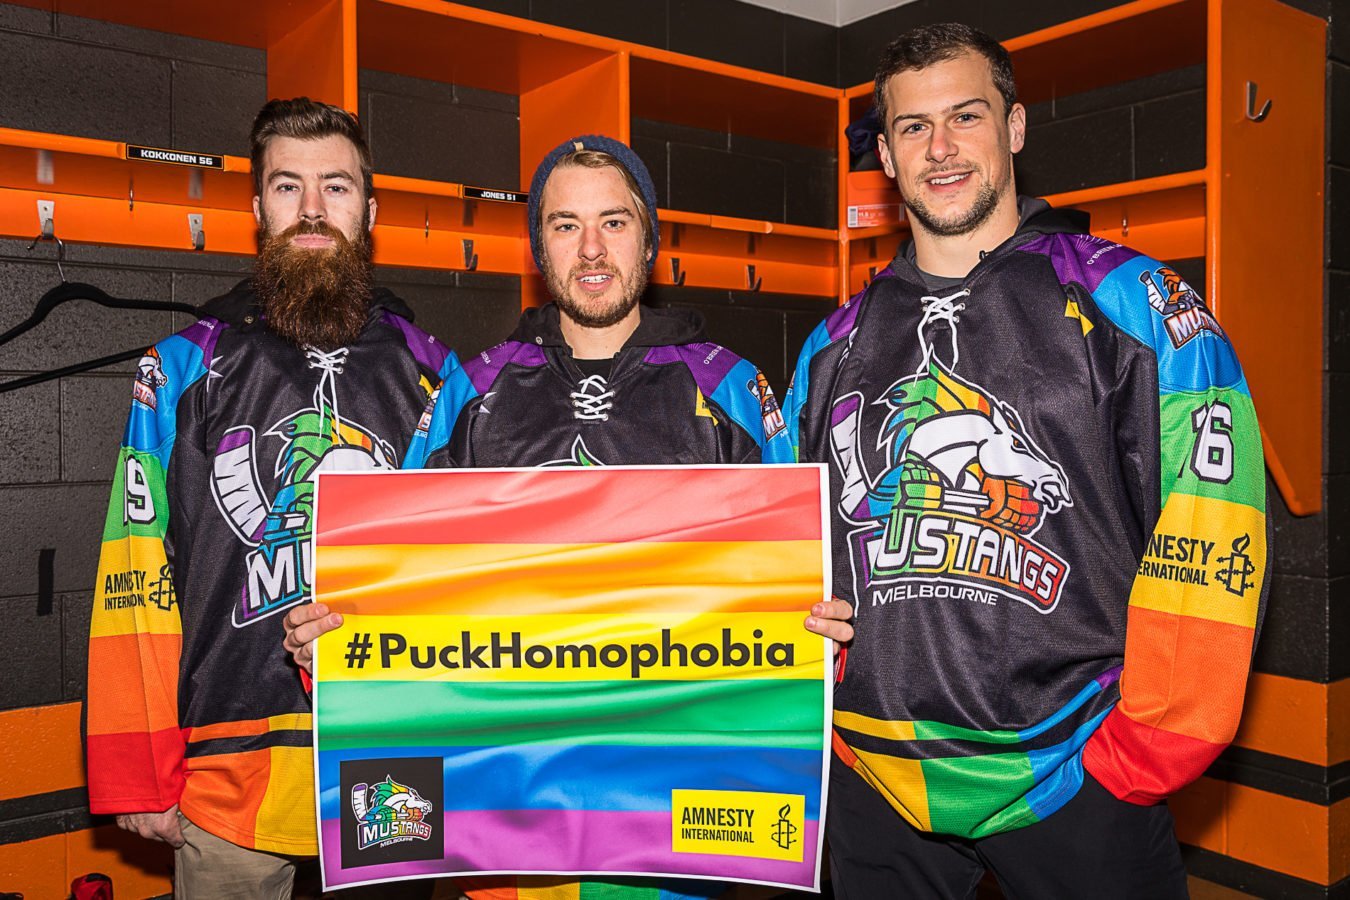 Melbourne Mustangs Ice Hockey team wear rainbow jerseys to support LGBTIQ+ rights.